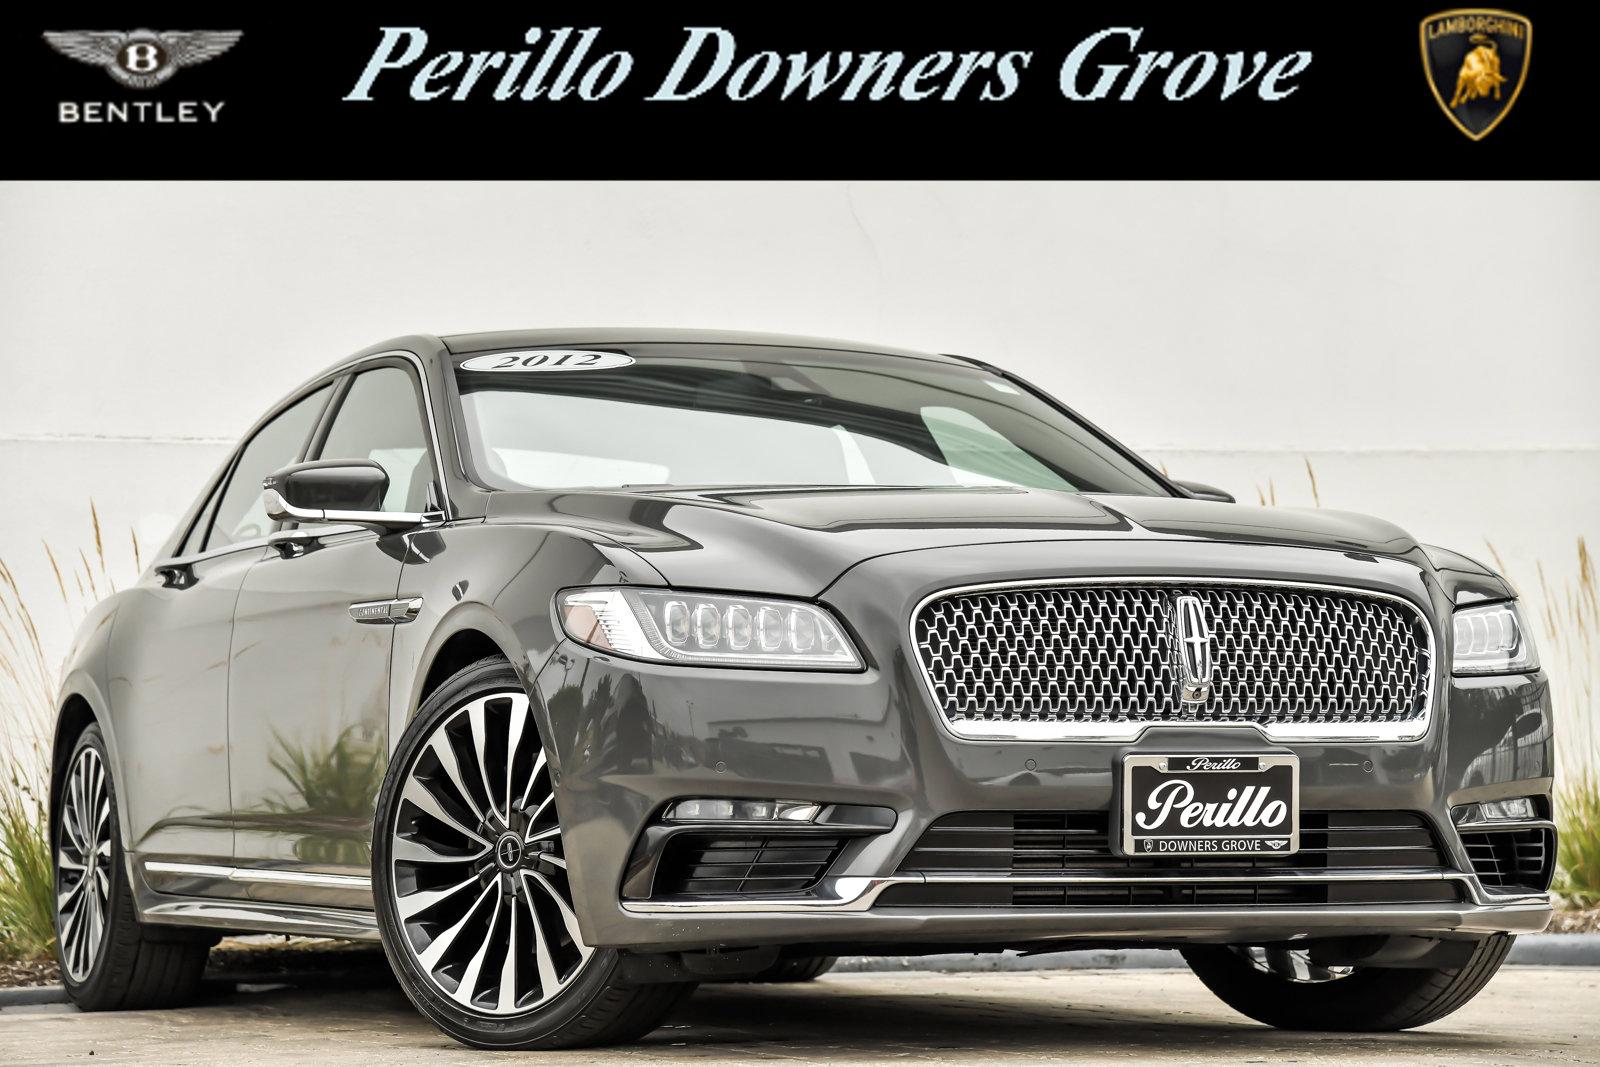 Used 2017 Lincoln Continental Black Label | Downers Grove, IL